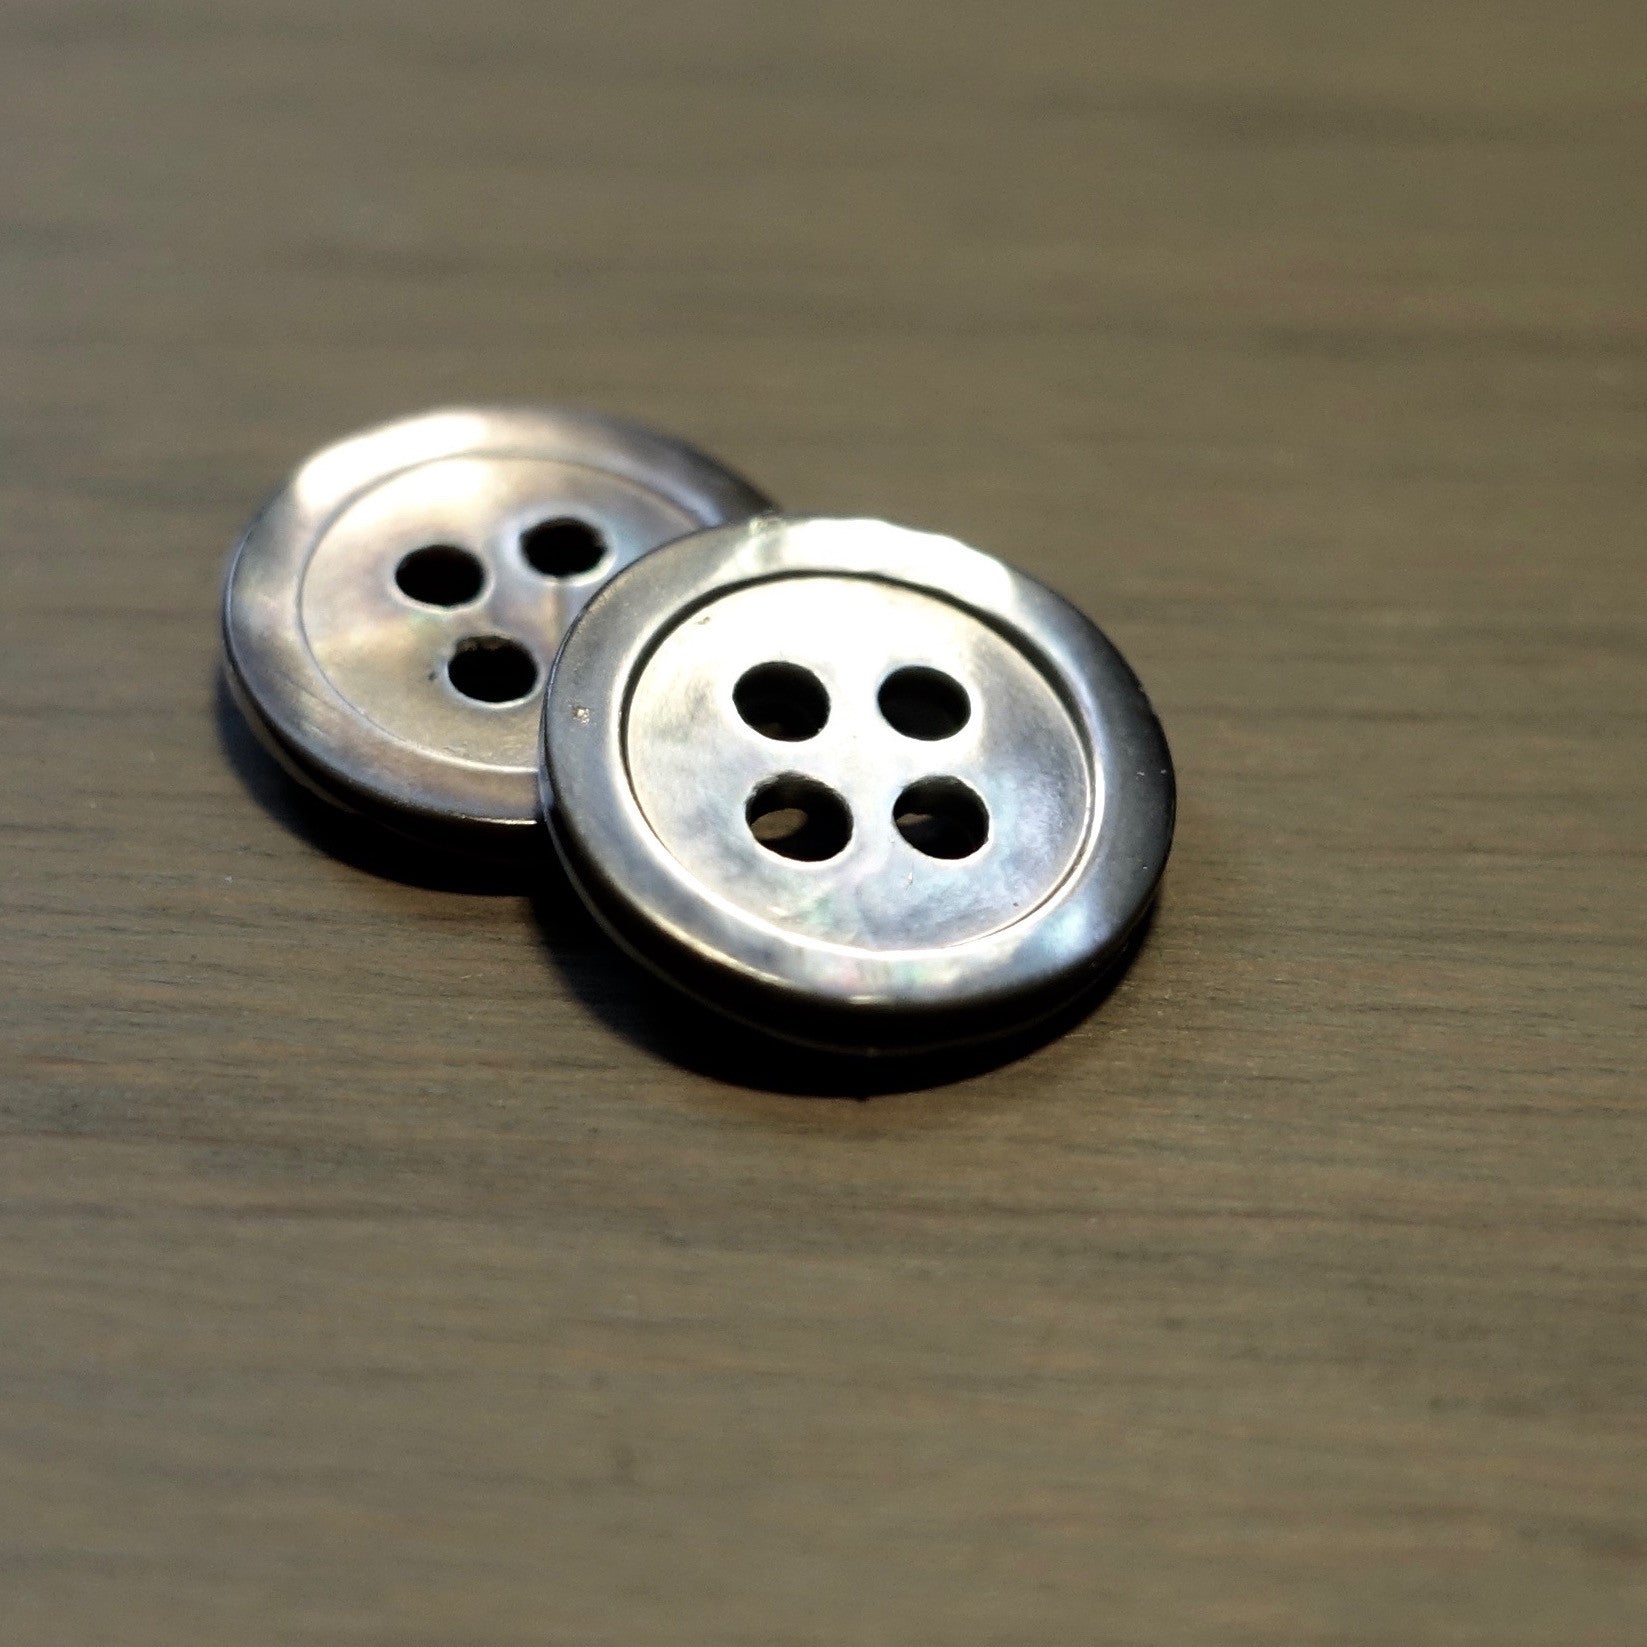 Mother of Pearl Buttons we salute you!